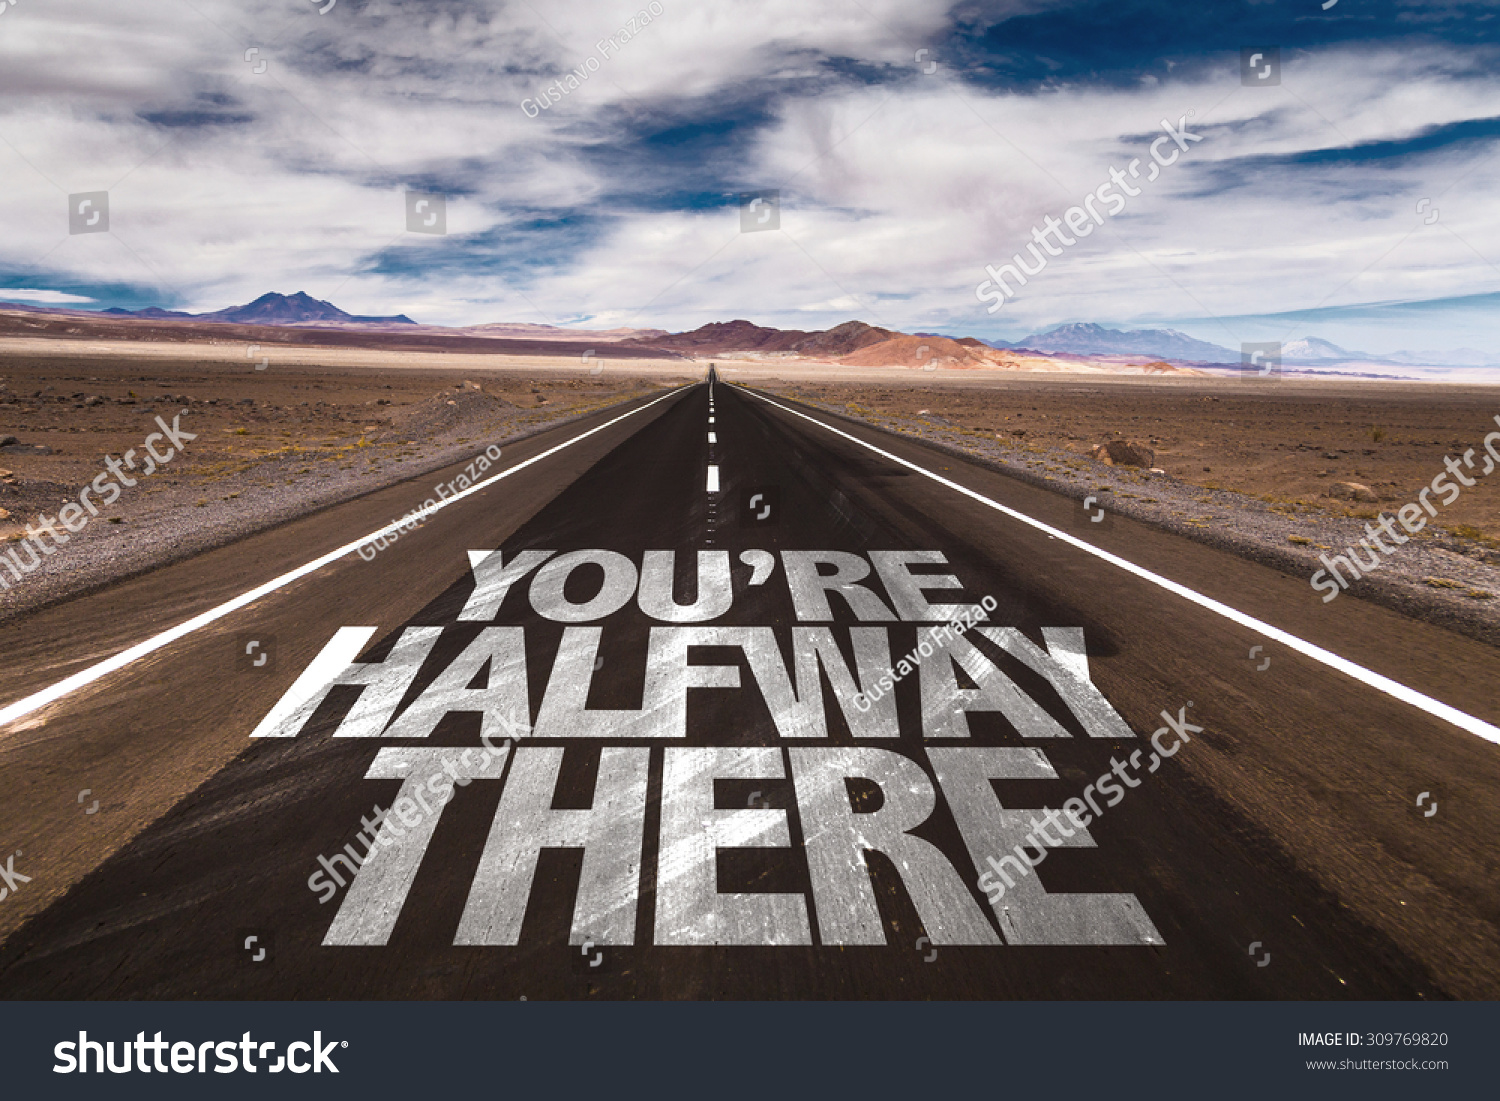 Image result for halfway there images